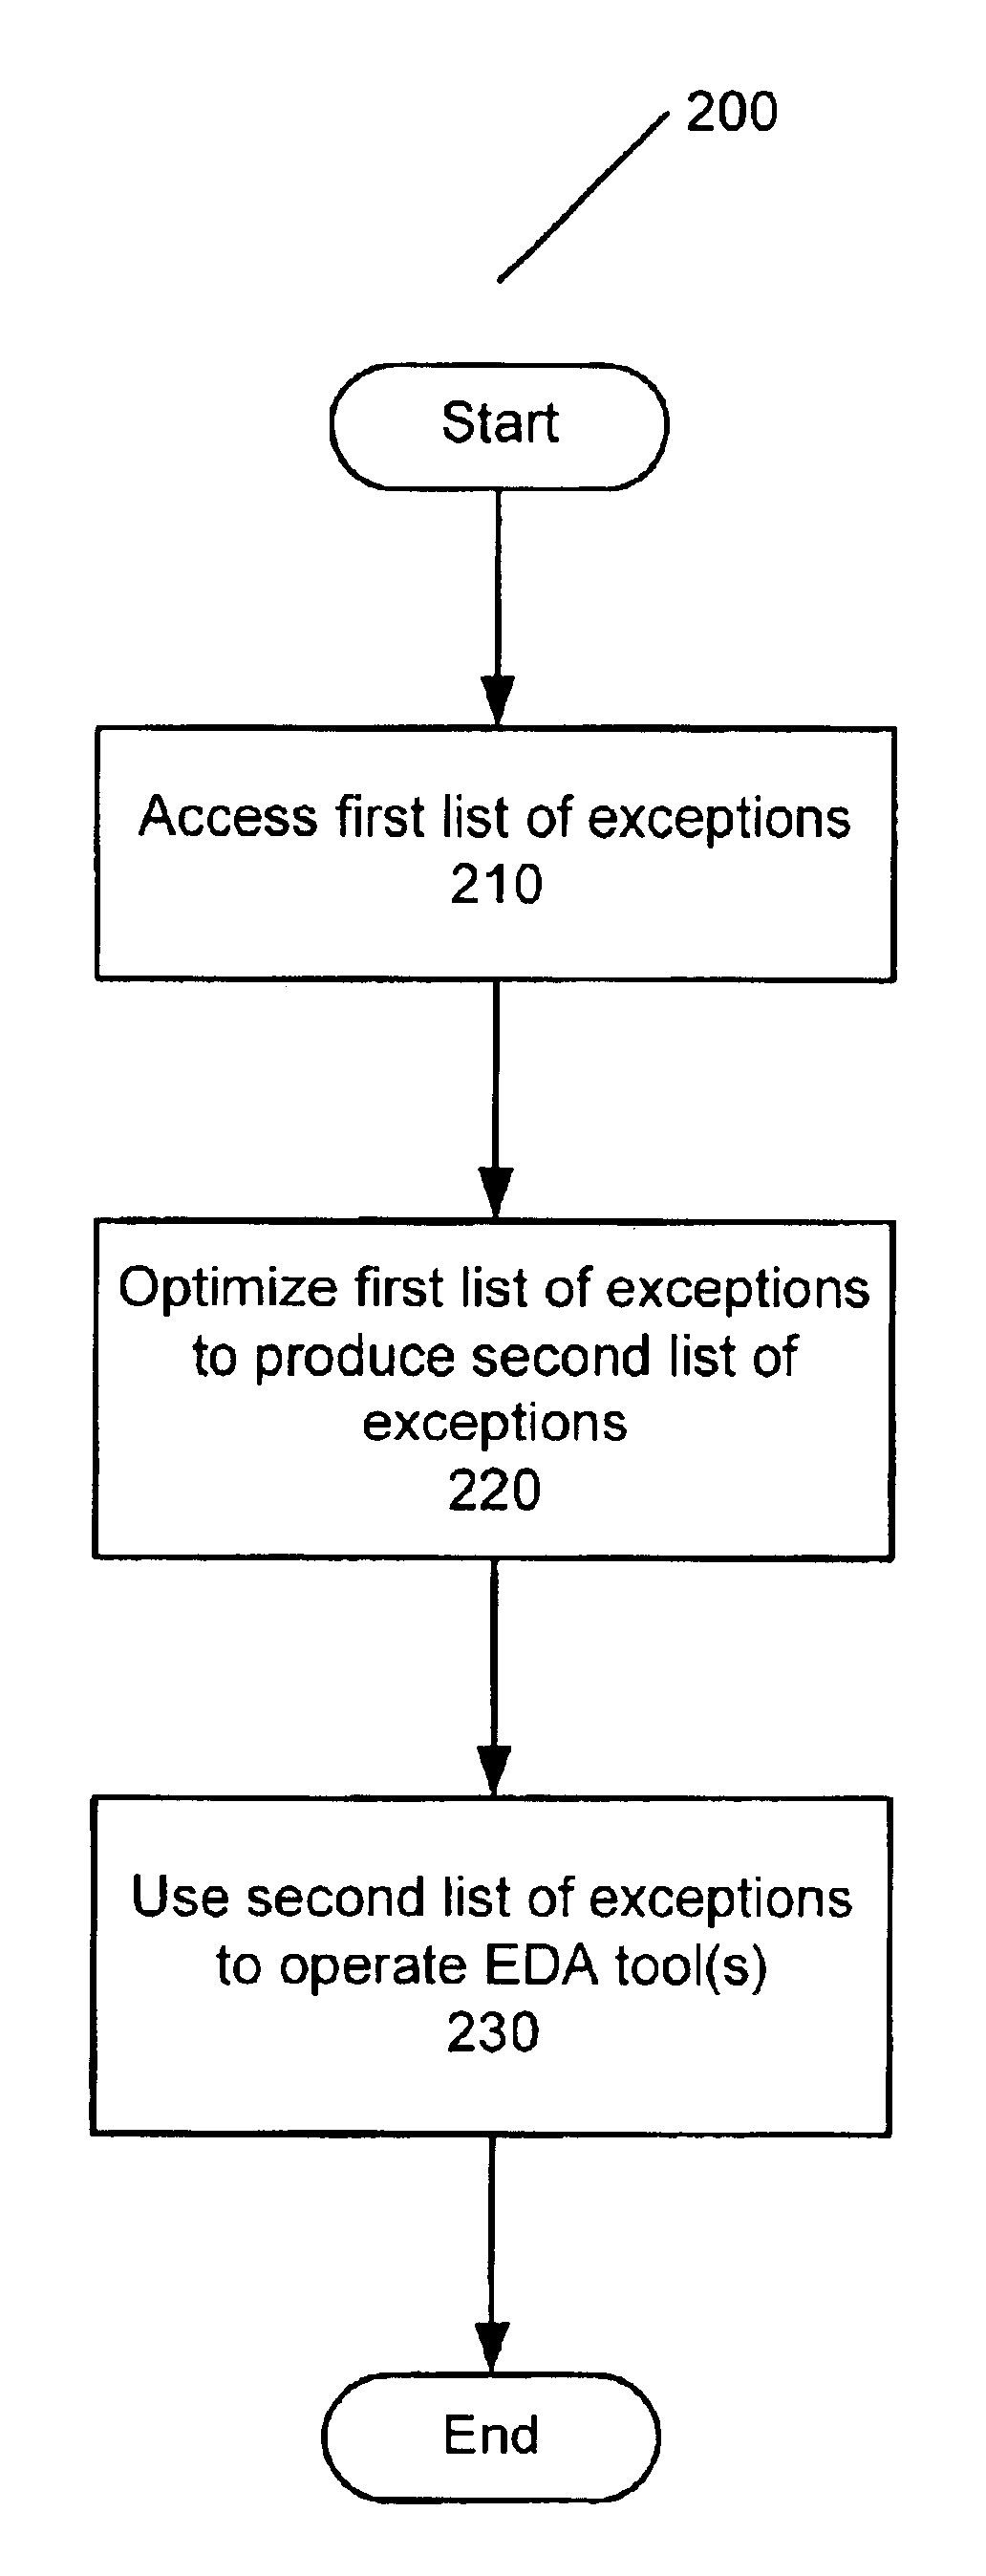 System and method for optimizing exceptions